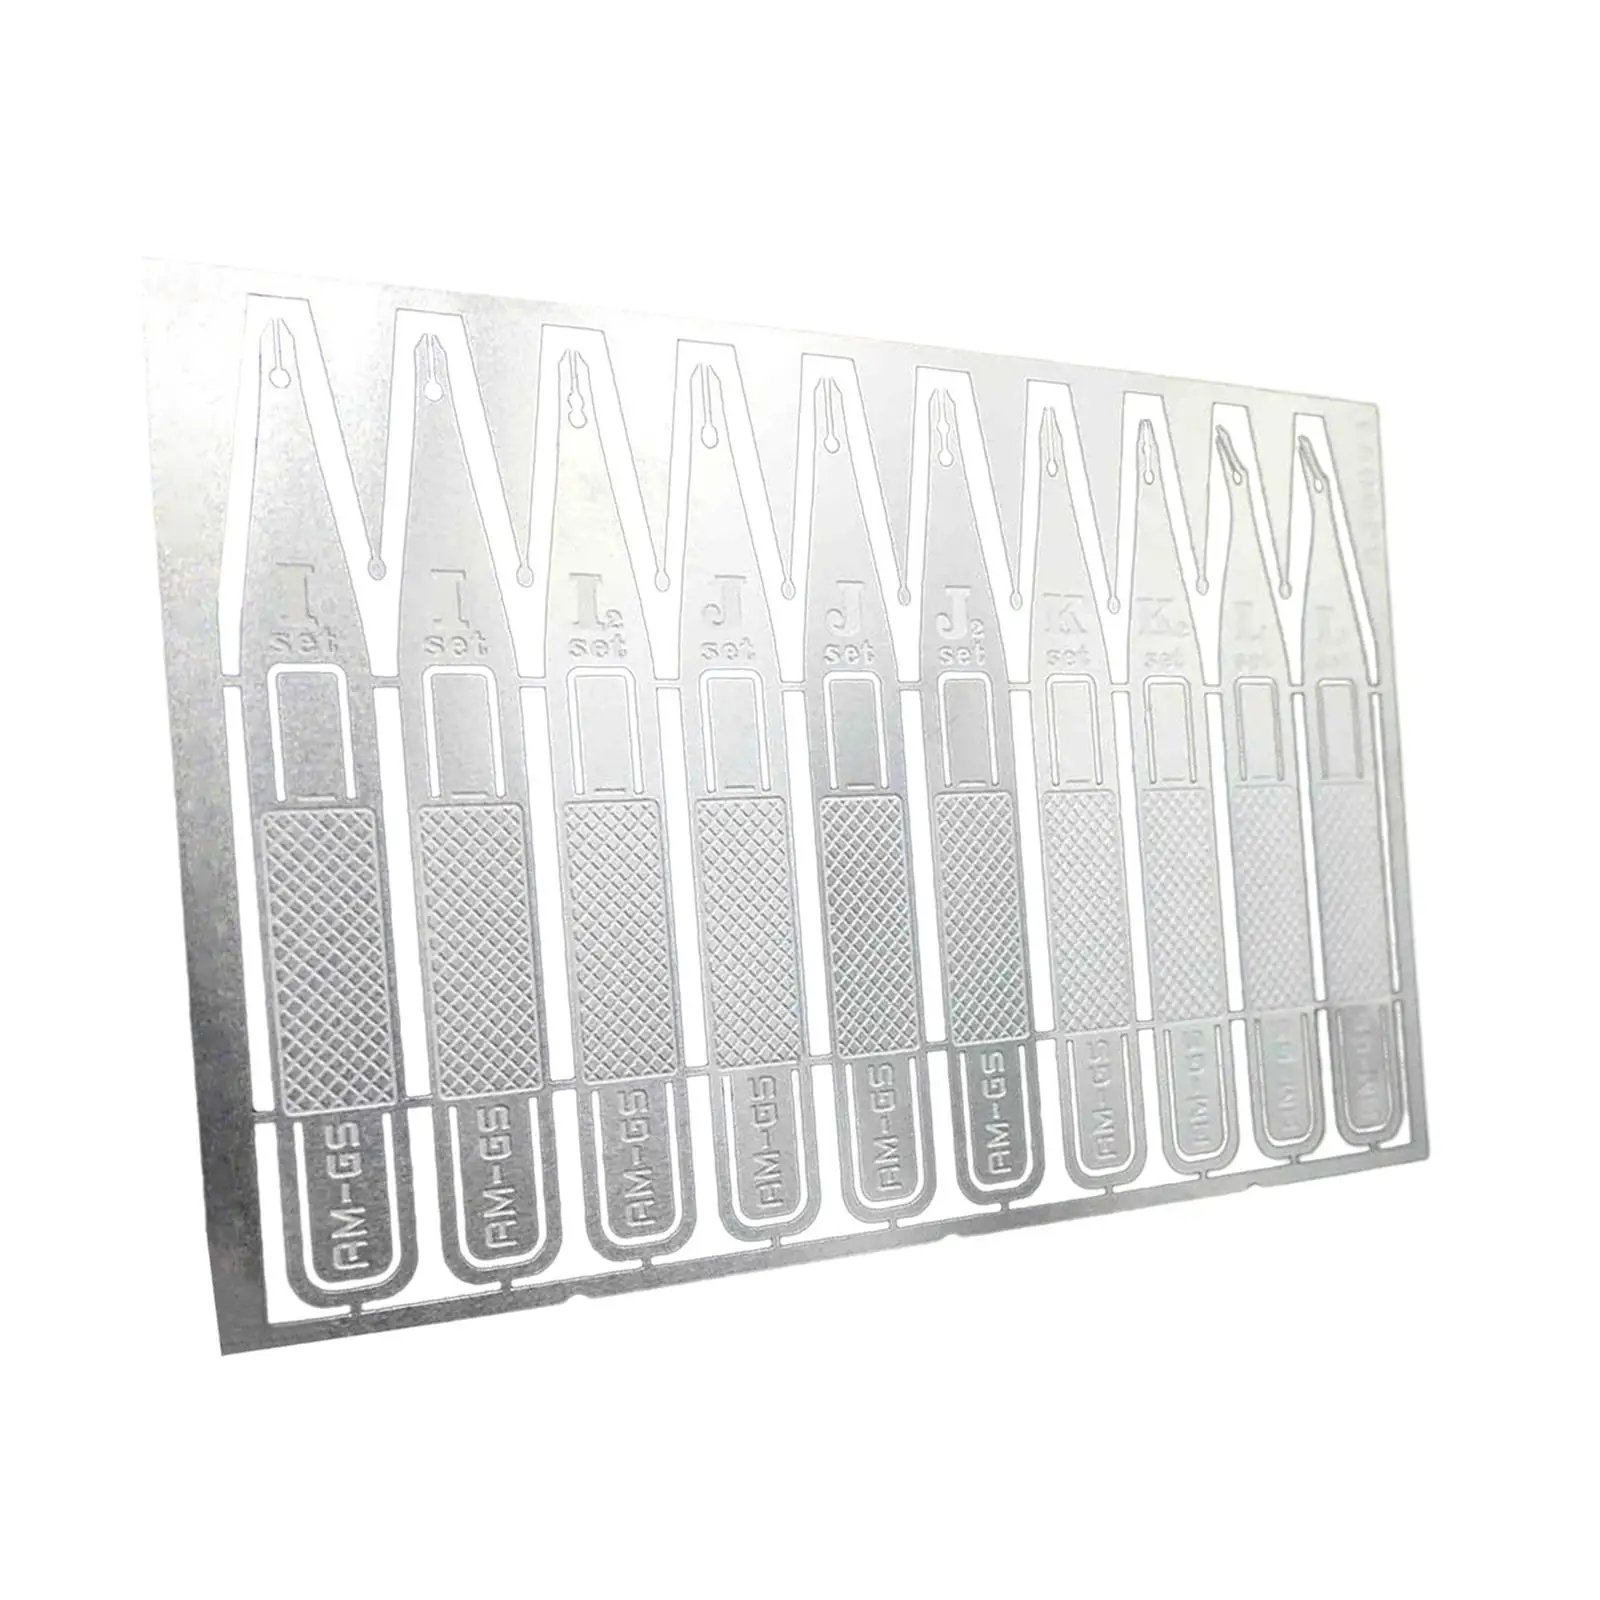 Precision Glue Micro Tips Adhesive Dispensers for Lab Dispensing Crafting